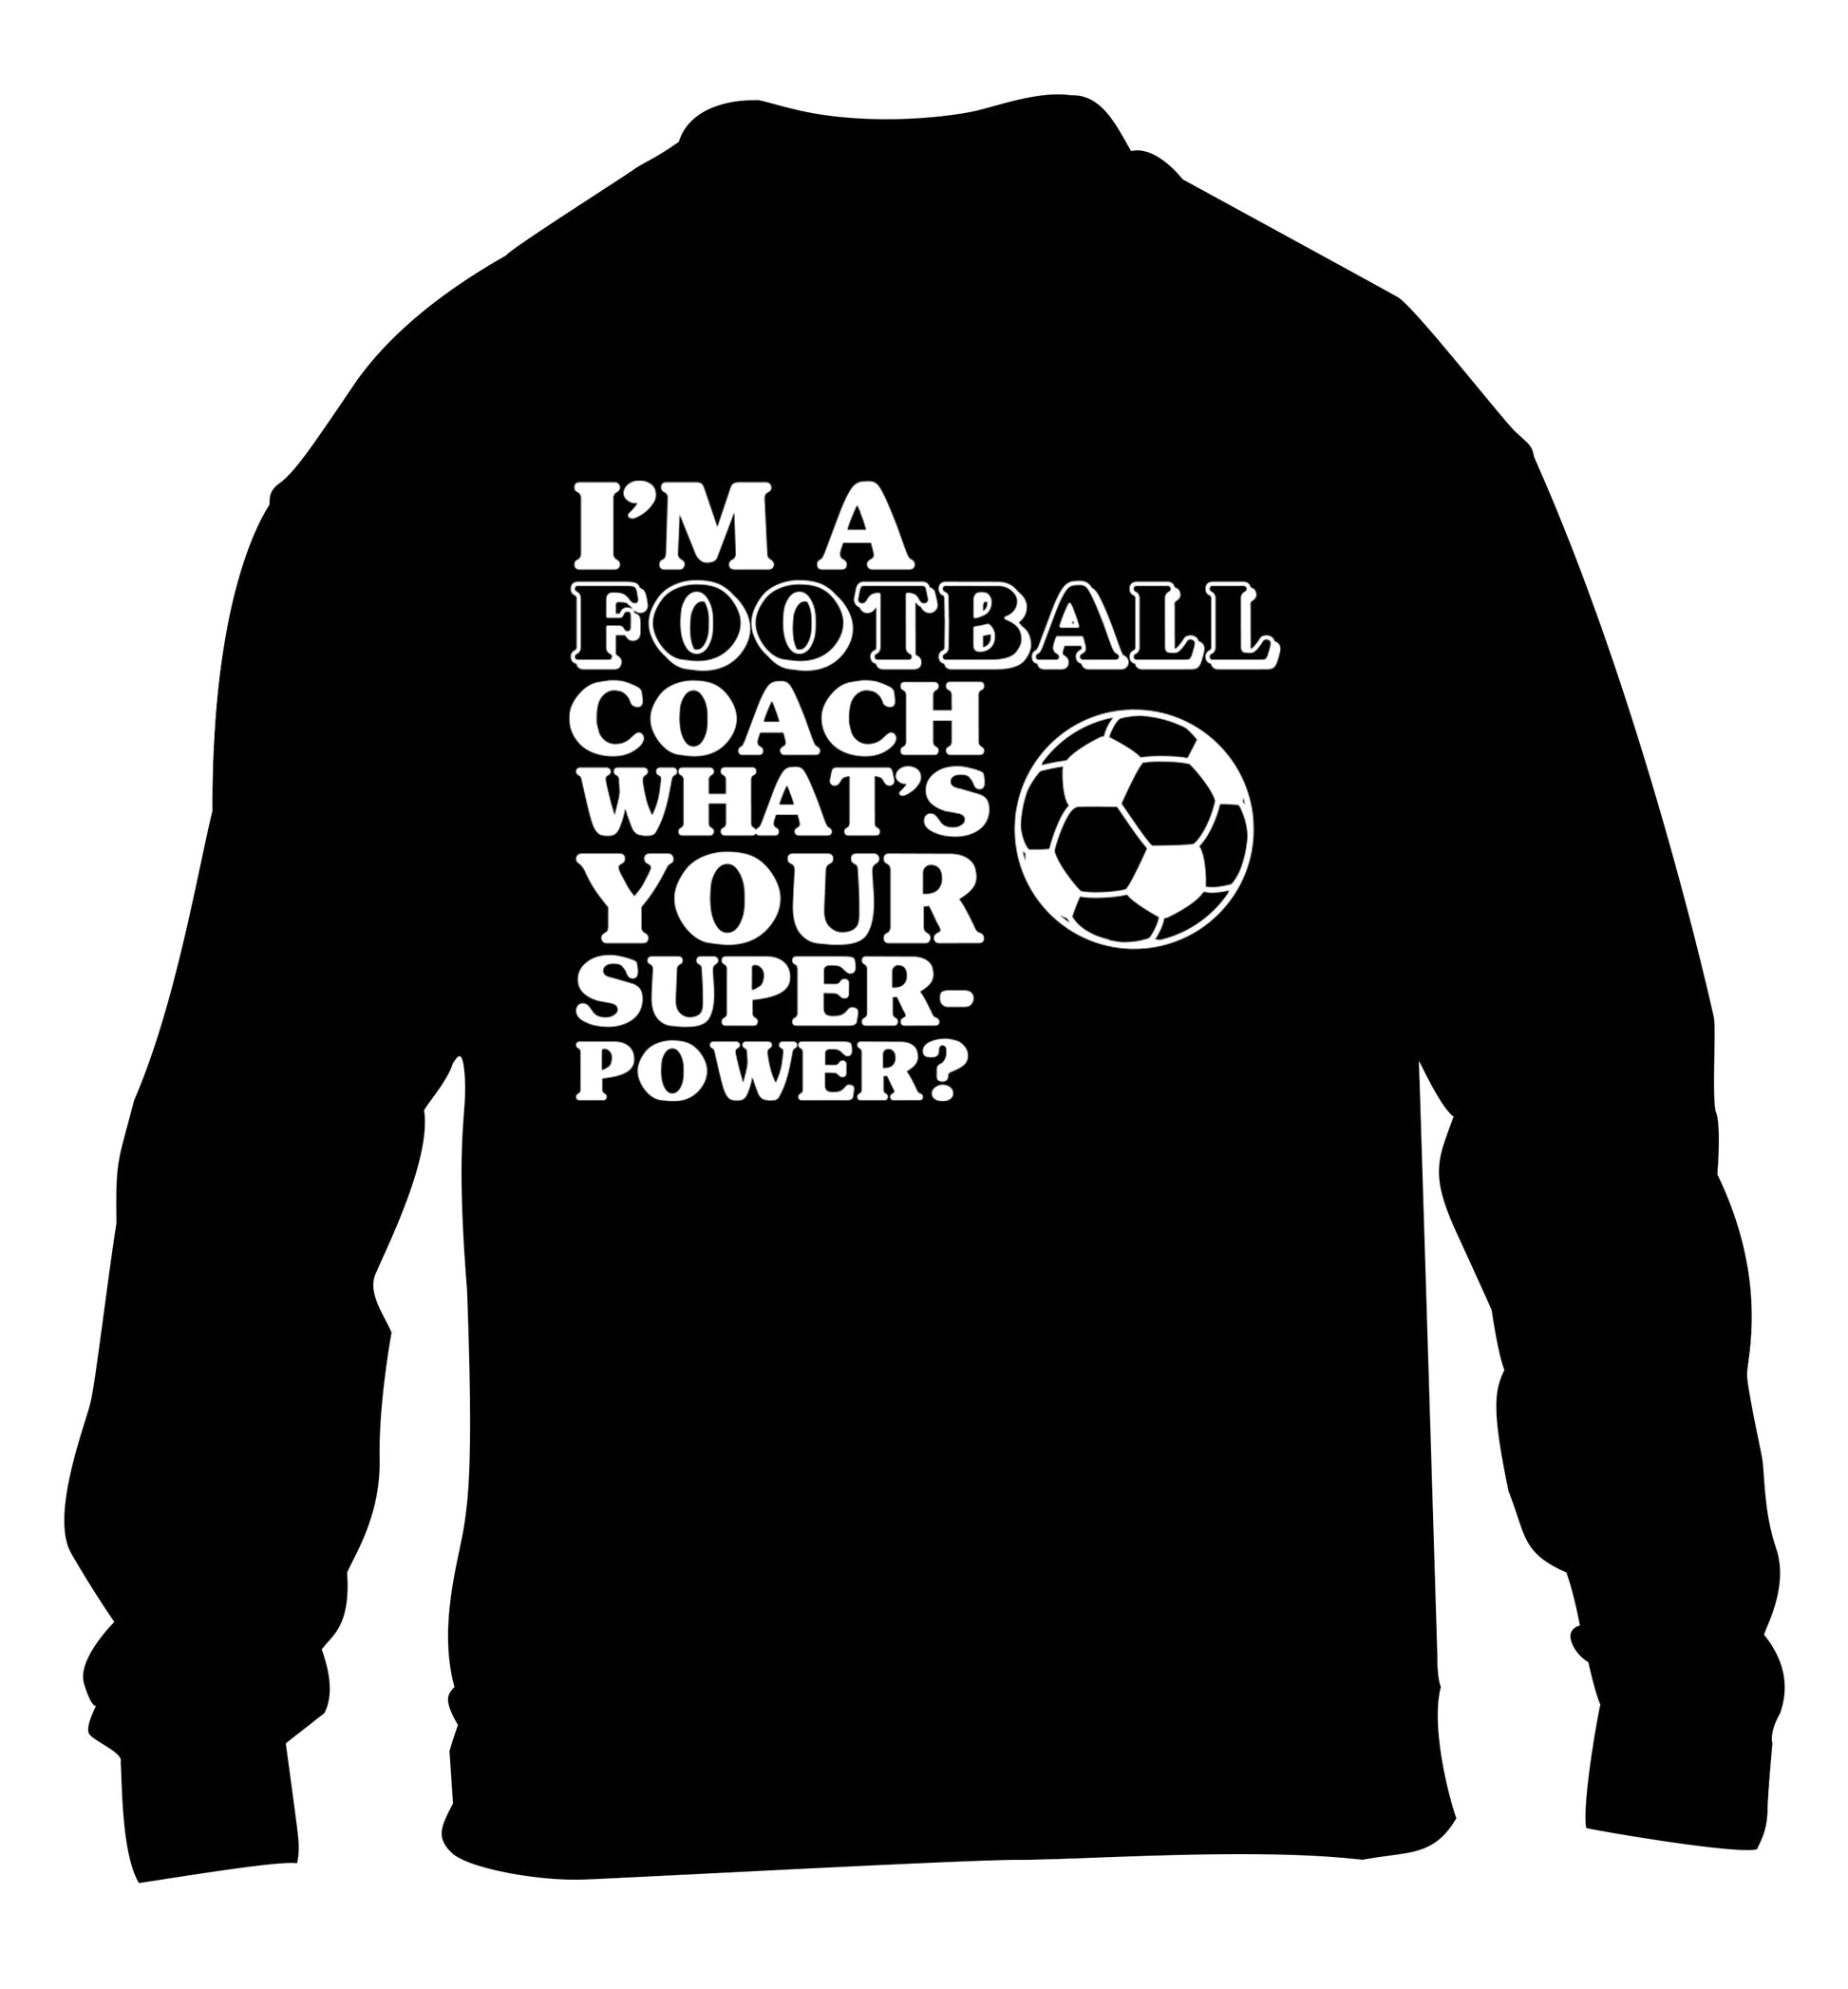 I'm a football coach what's your superpower? children's black sweater 12-14 Years